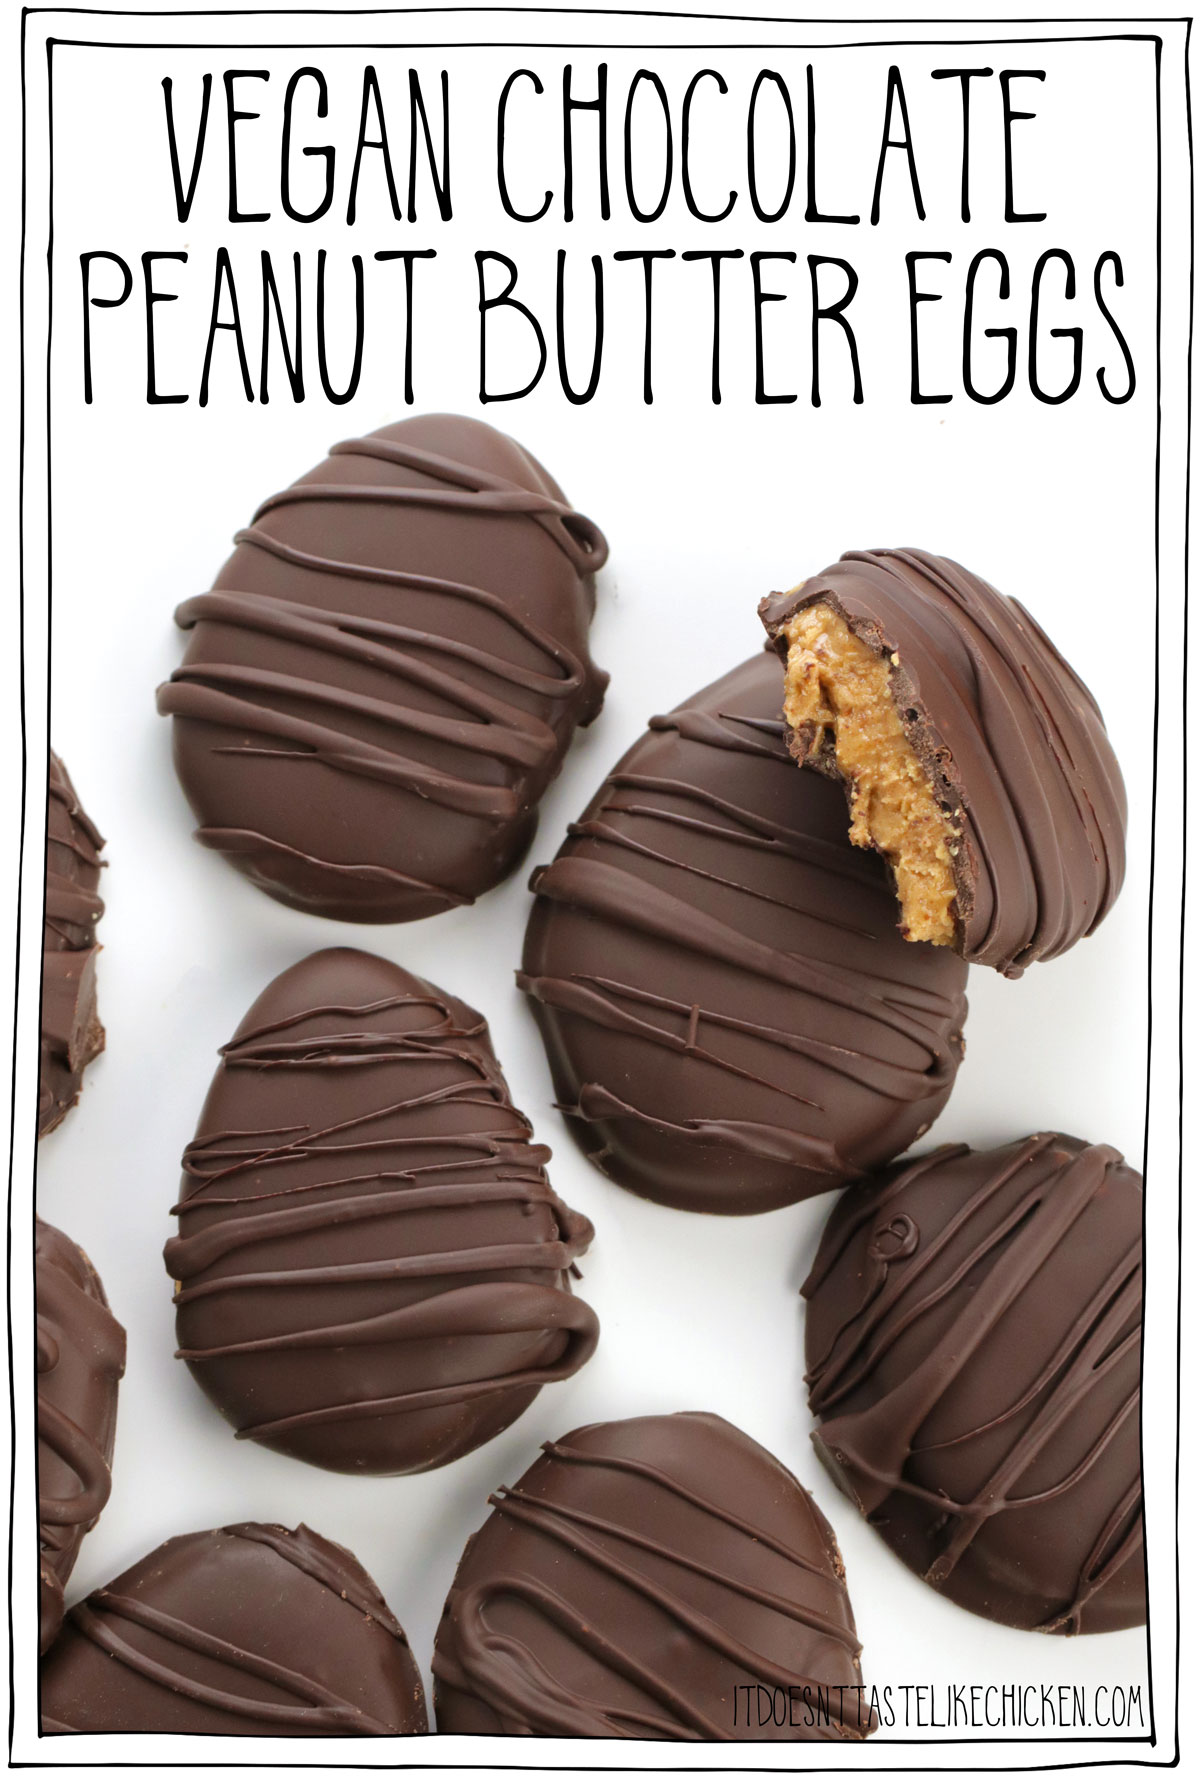 Just 5 ingredients to make these homemade Vegan Chocolate Peanut Butter Eggs! They taste just like Reese's (no really), except better because they are vegan! Melt-in-your-mouth salty, sweet peanut butter is dipped in melted chocolate. The perfect treat for your Easter basket!